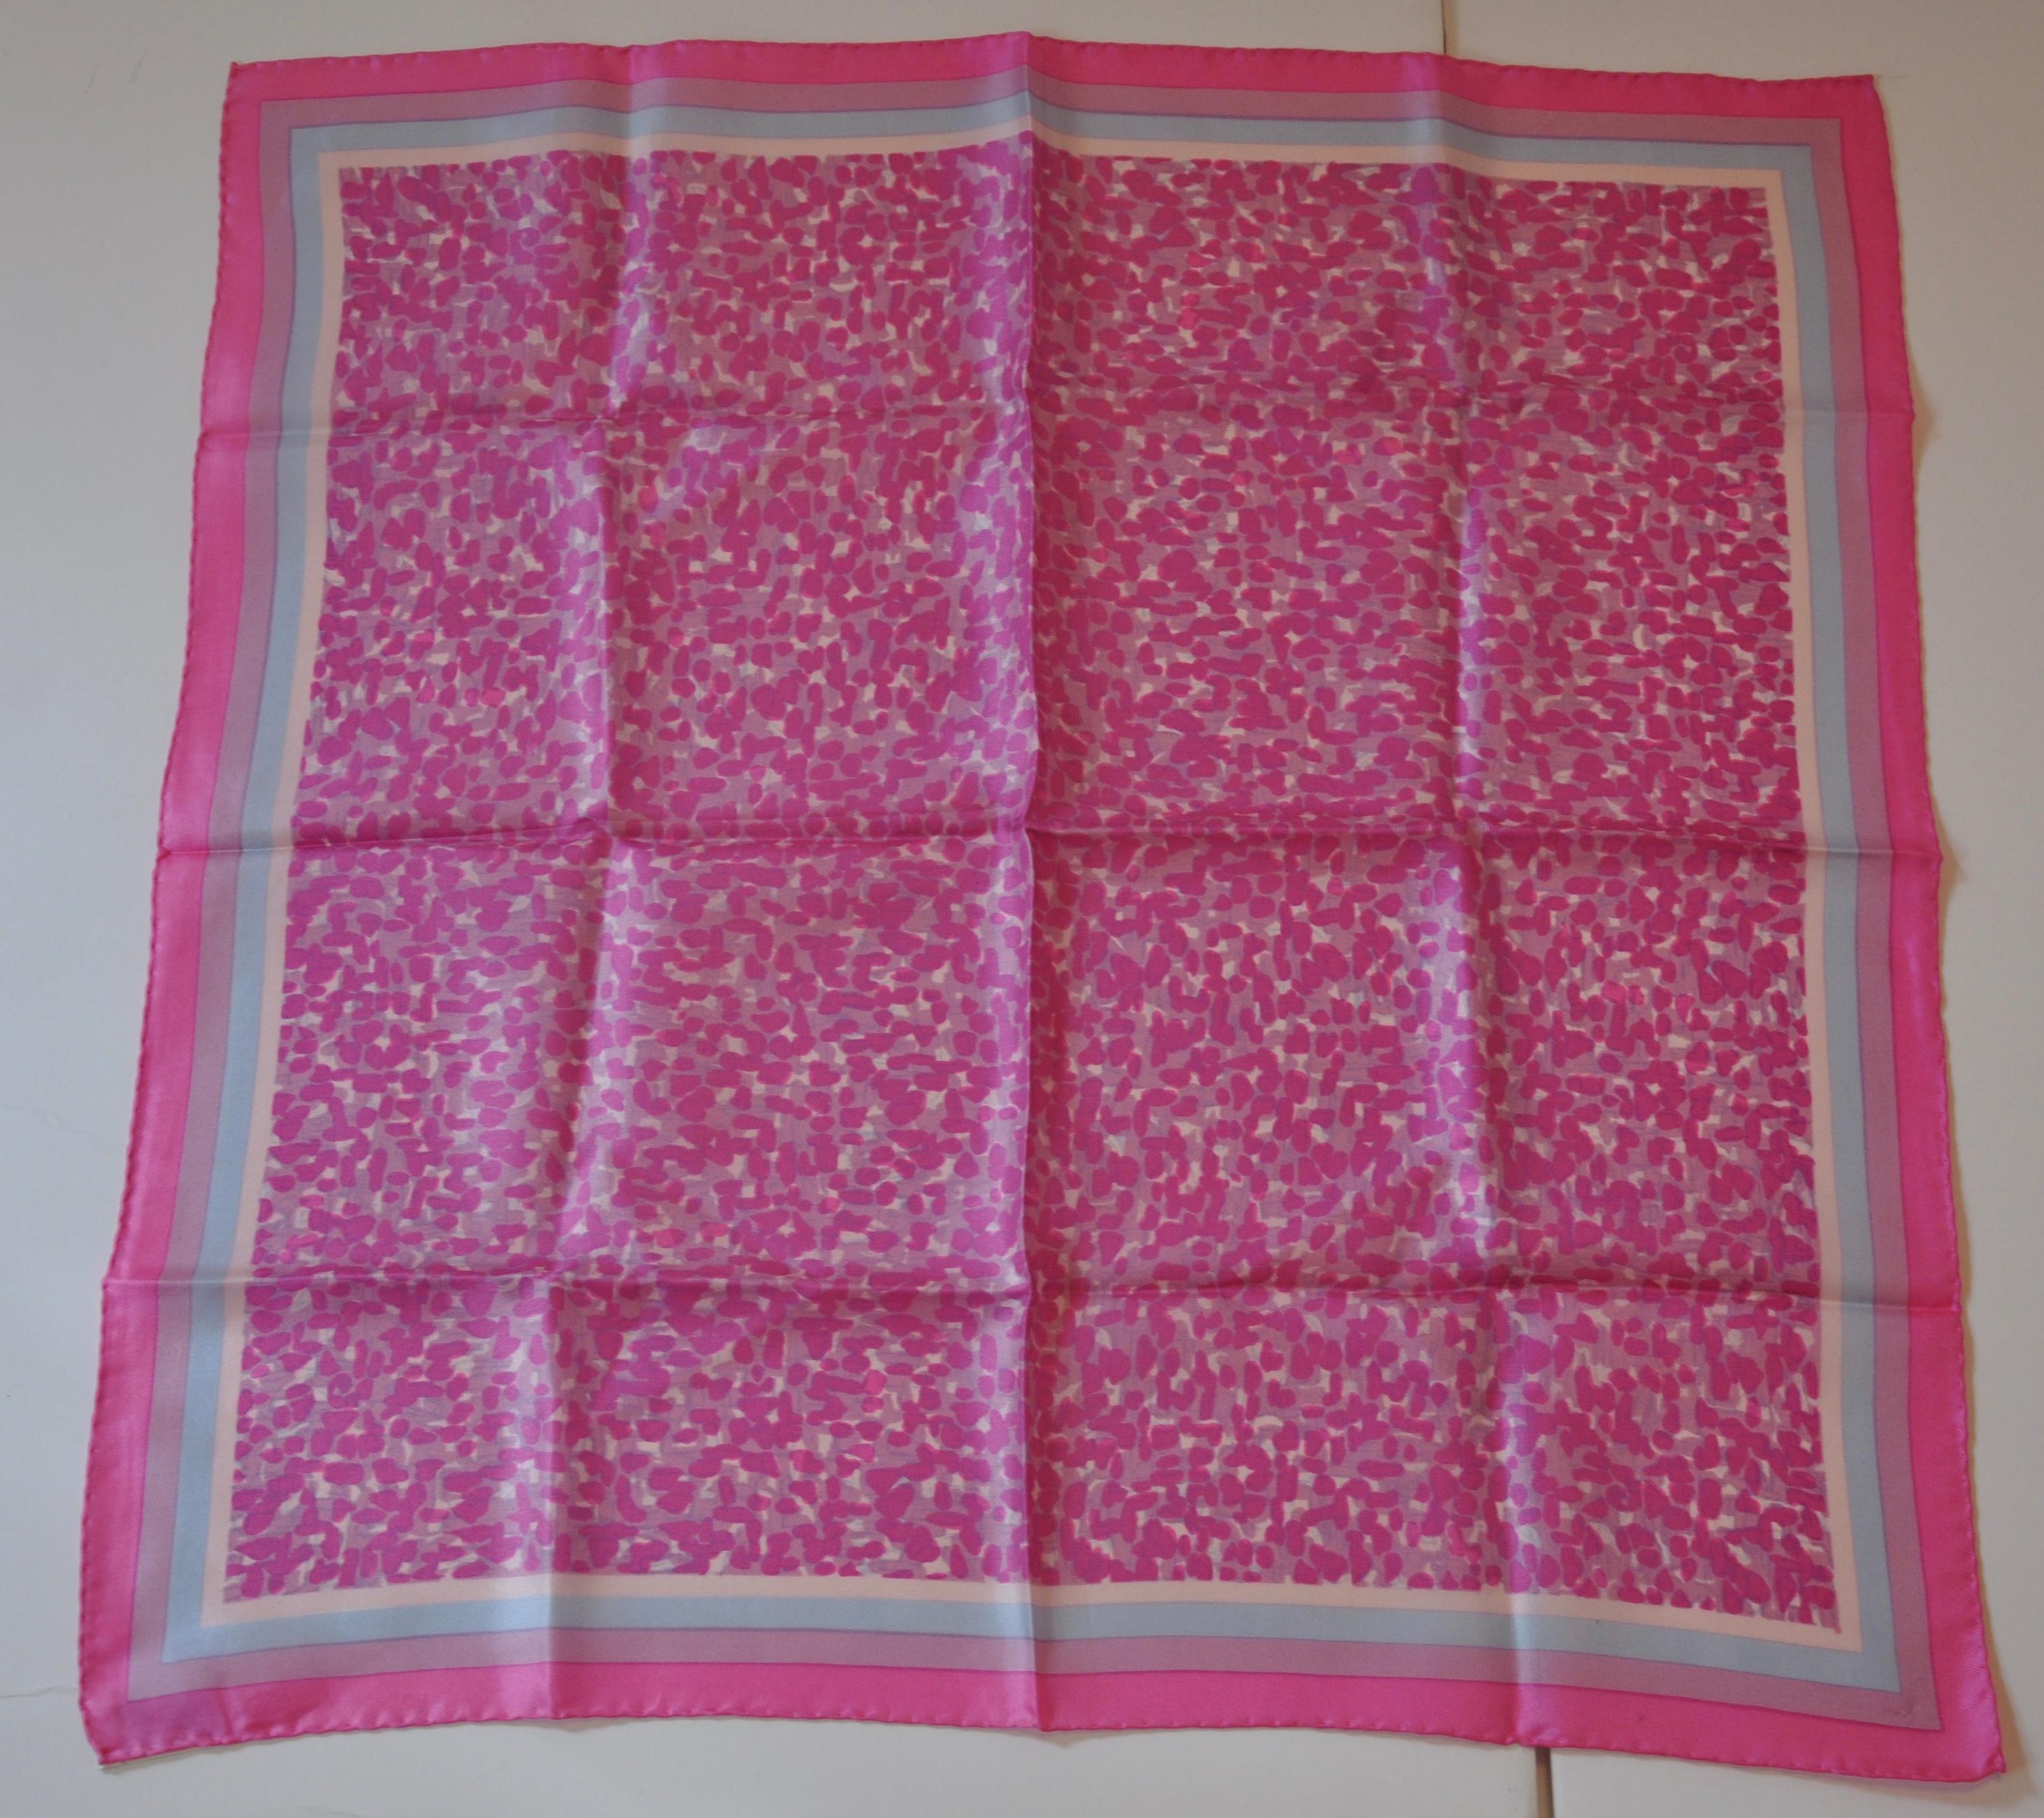         This simply wonderful lovely shades of fuchsia specks accented with lavender striped borders silk scarf measures 21 inches by 21 inches, with hand-rolled edges. Made in Japan.